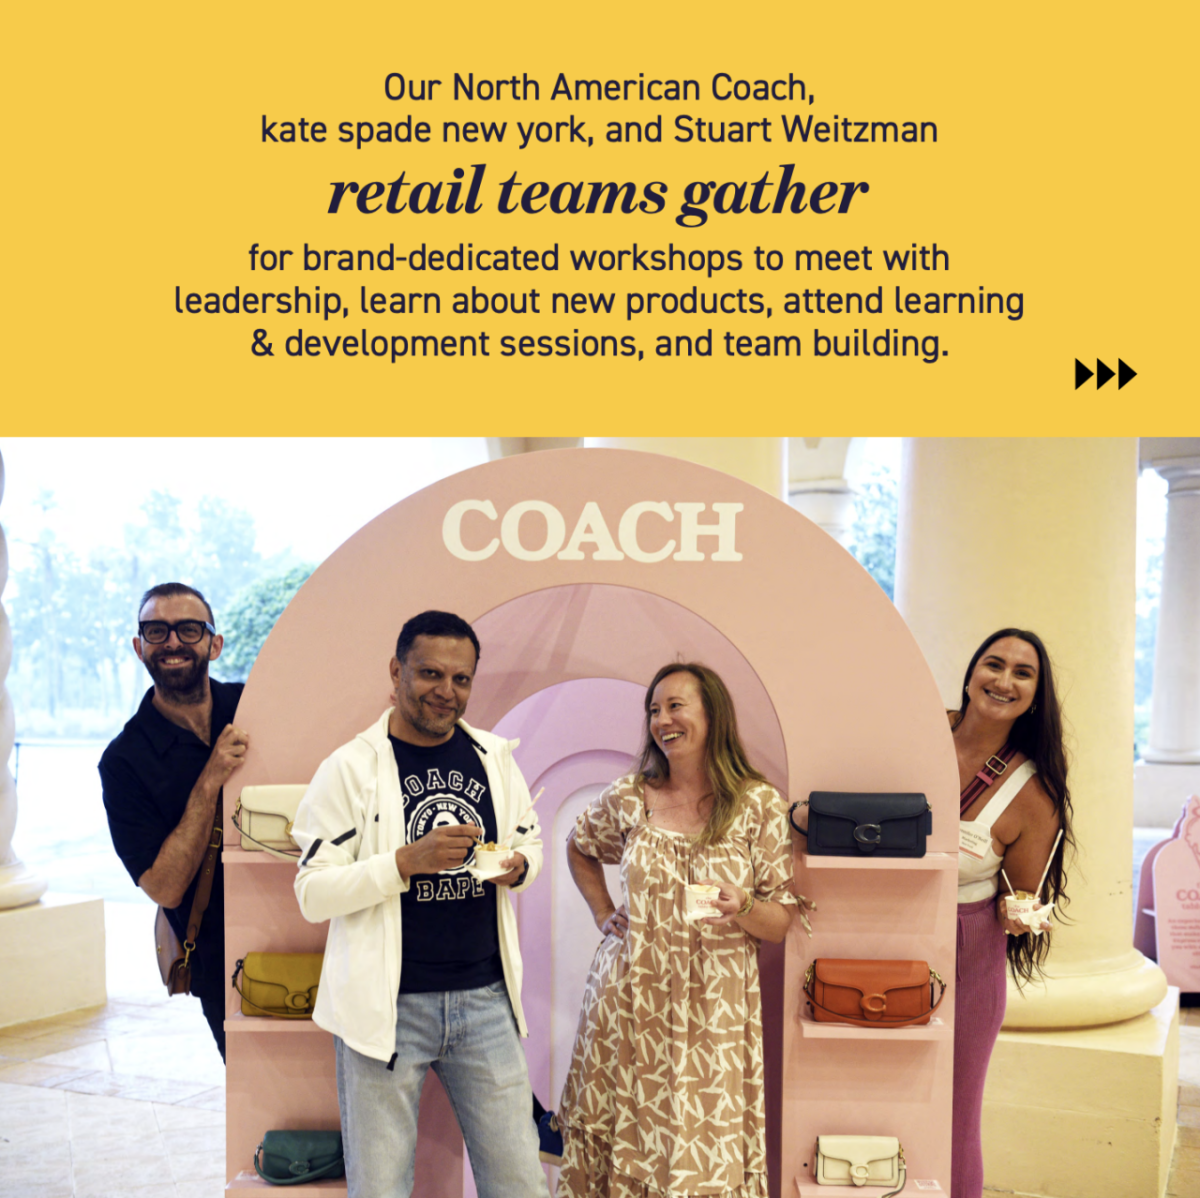 "Our North American Coach, kate spade new york, and Stuart Weitzman retail teoms gather for brand-dedicated workshops to meet with leadership, learn about new products, attend learning & development sessions, and team building."